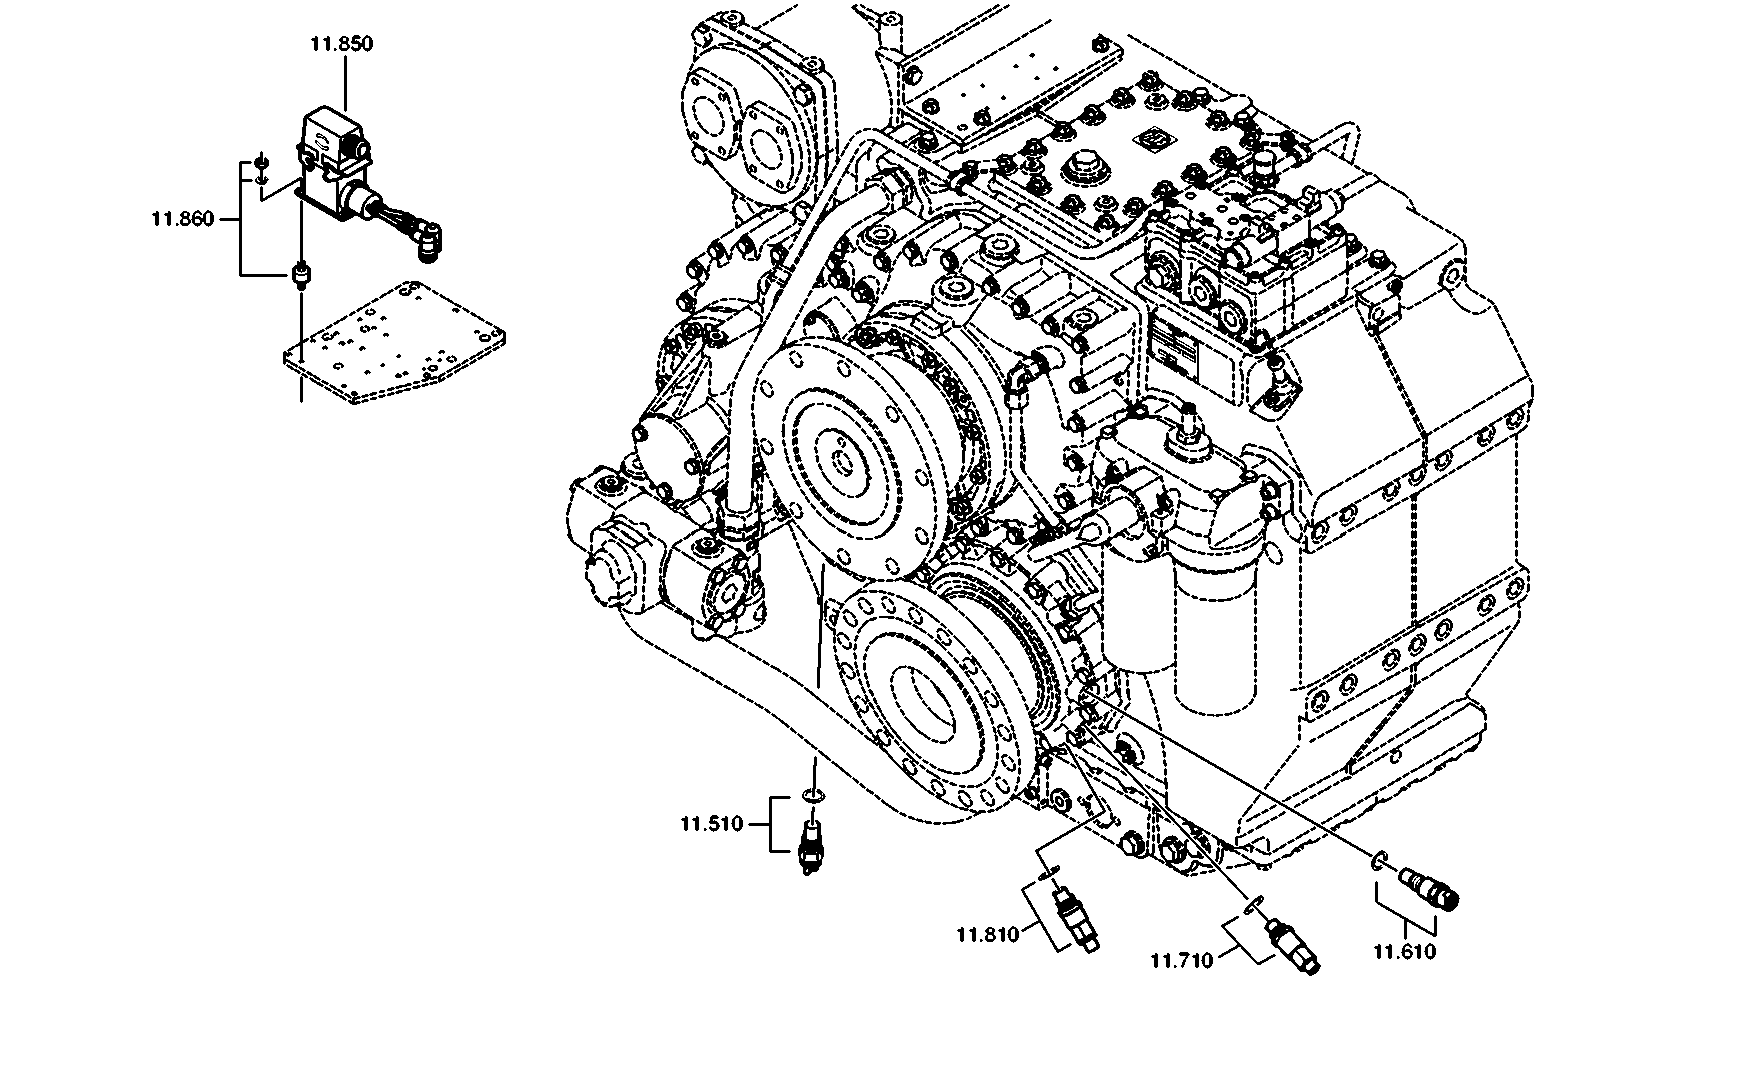 drawing for MOXY TRUCKS AS 452031 - INDUCTIVE TRANSMITTER (figure 3)